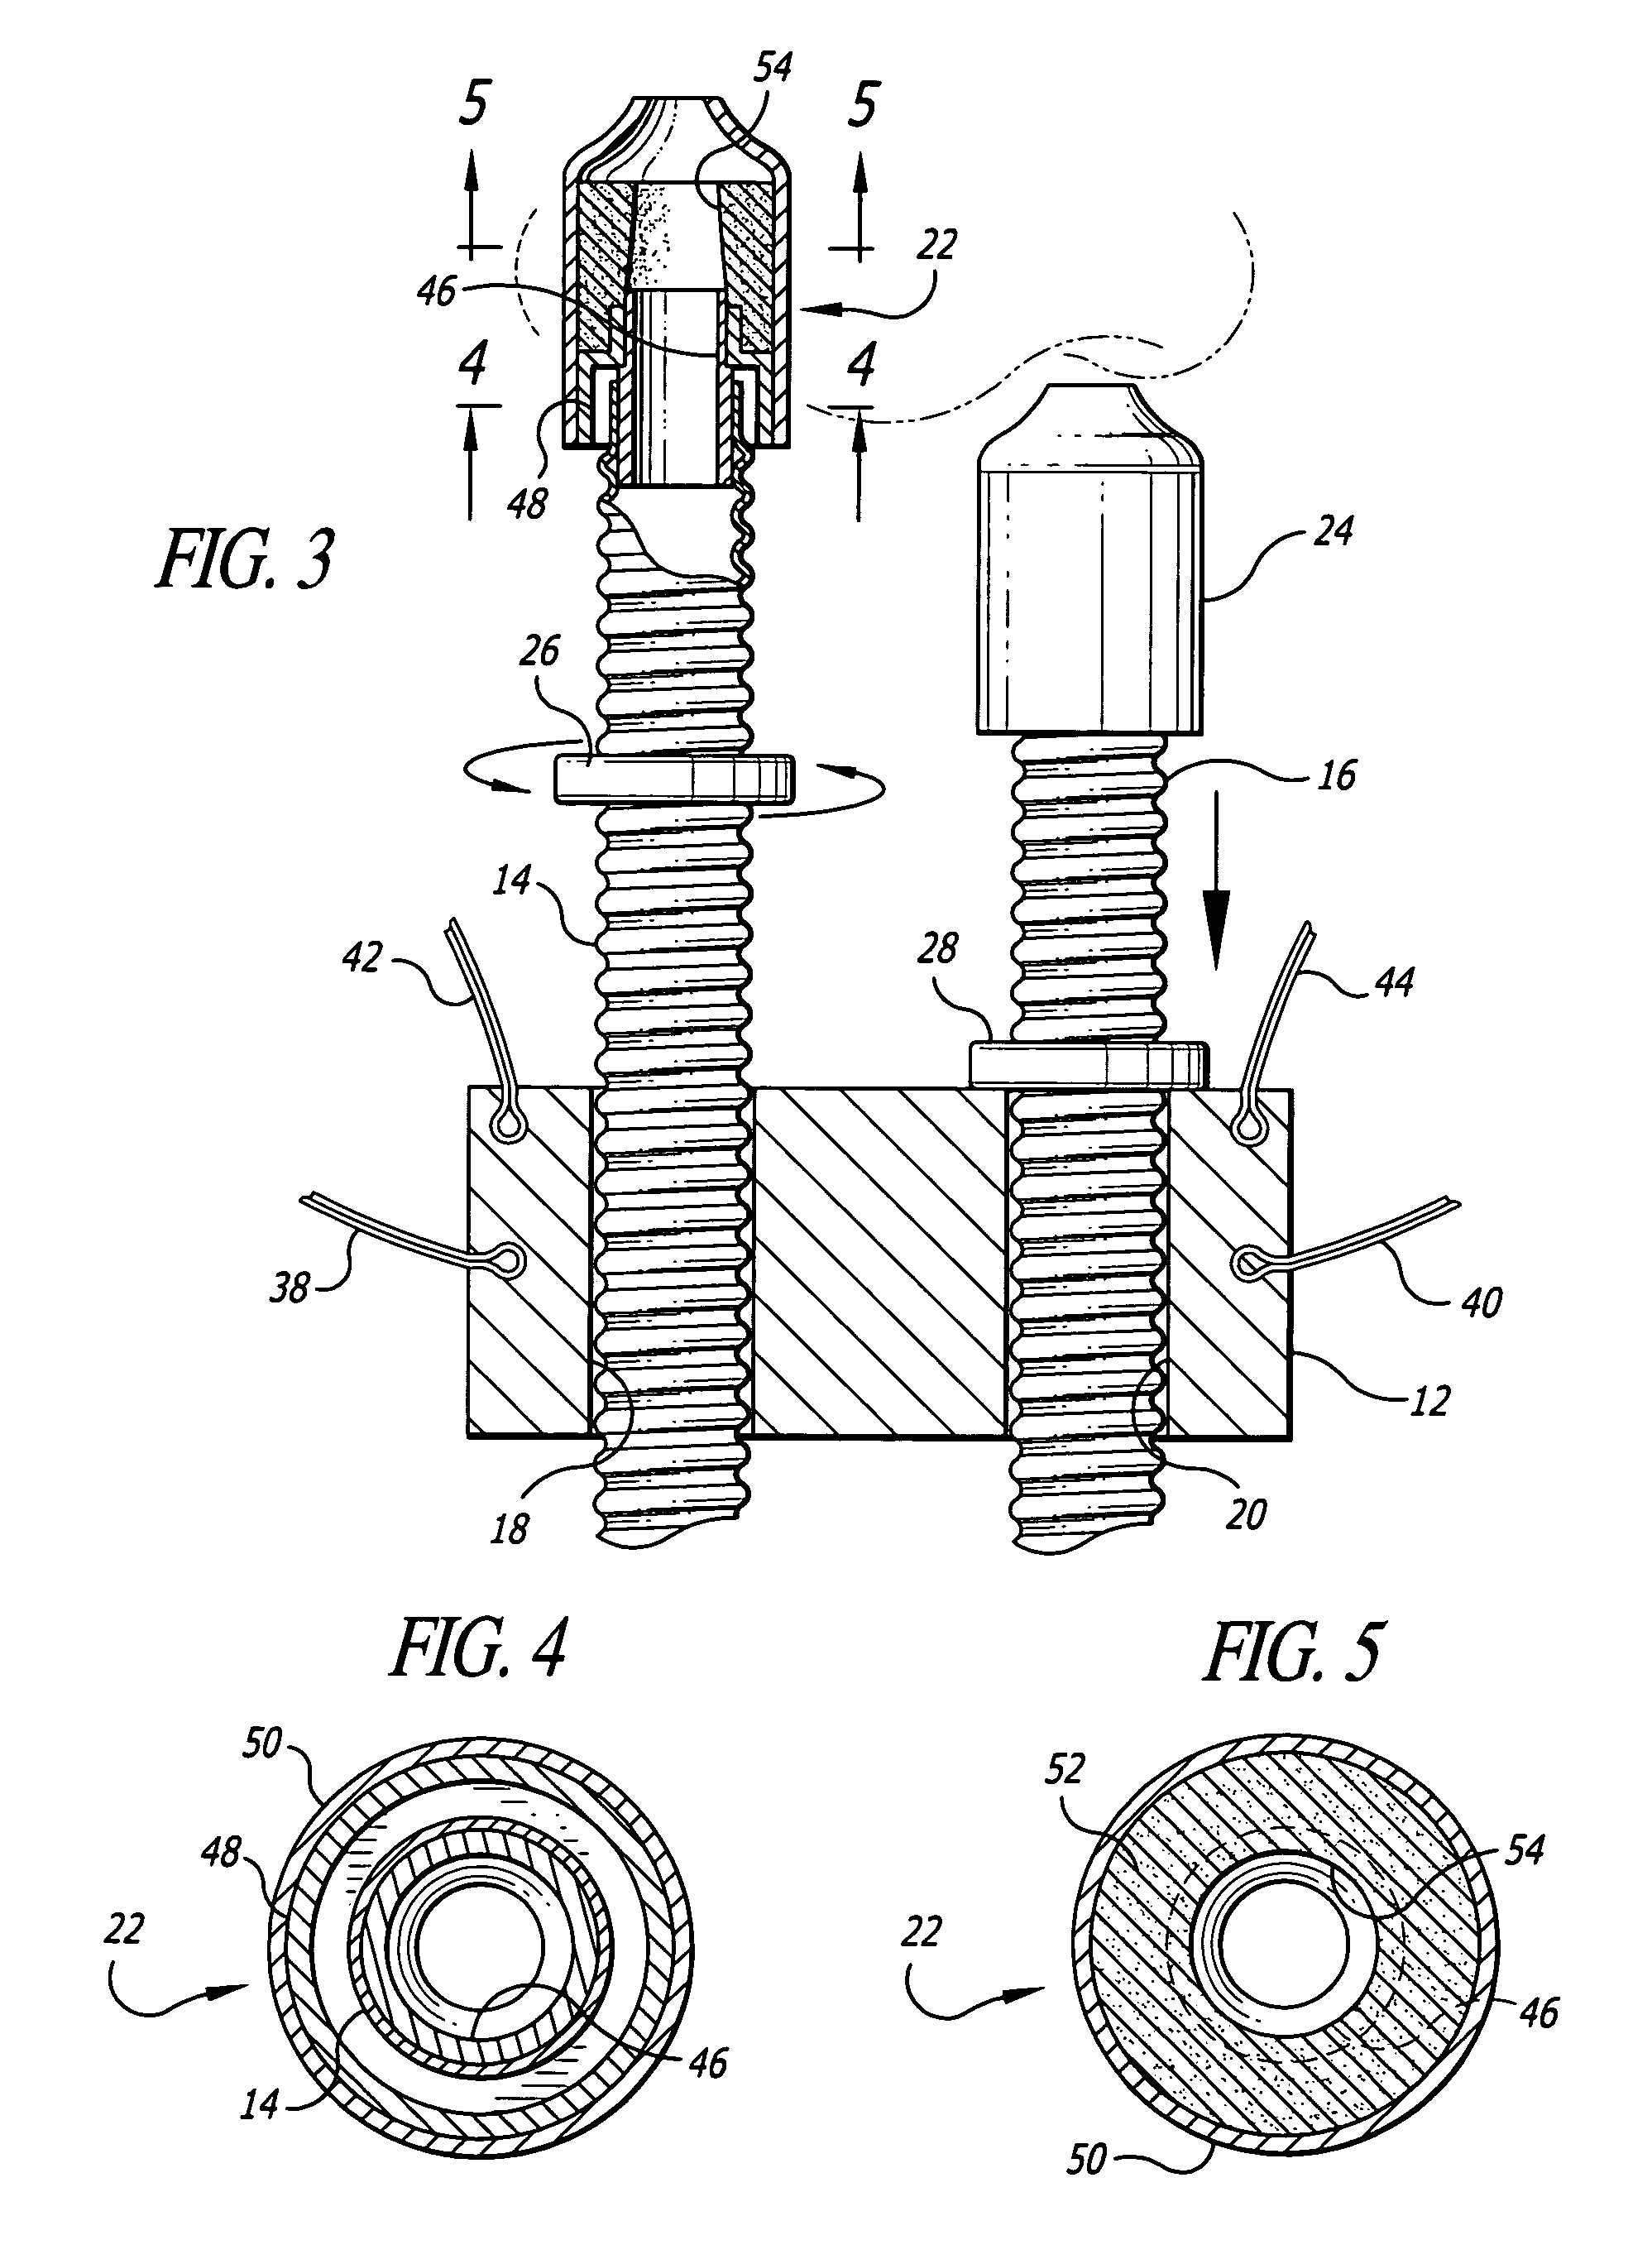 Adjustable support system for nasal breathing devices